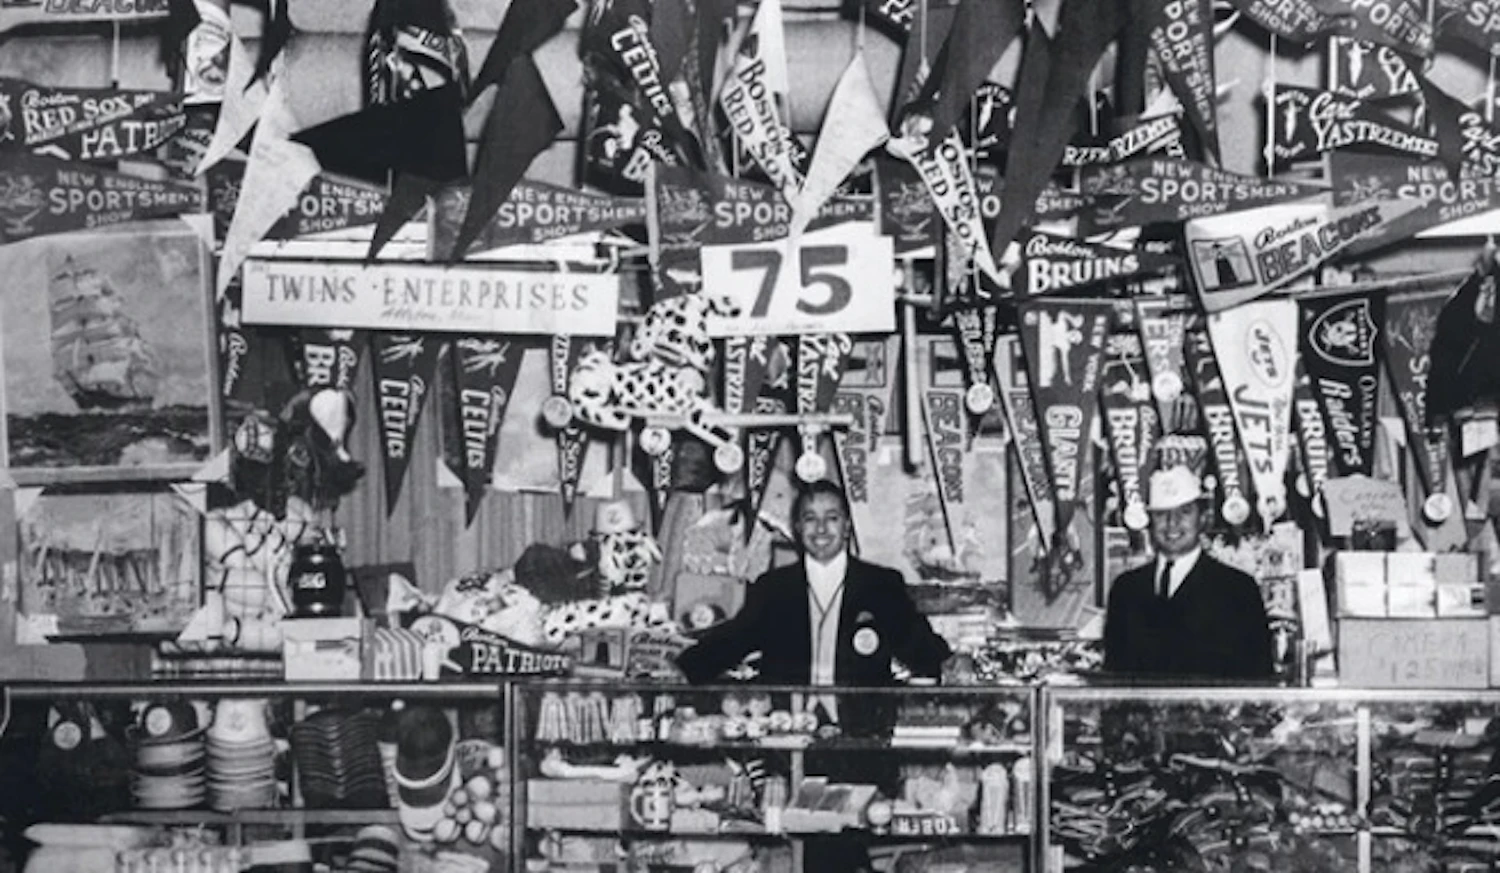 A variety of goods including pennants were sold in the souvenir shop run by the company 'Twins Enterprises' which was founded by Arthur and Henry in 1947.